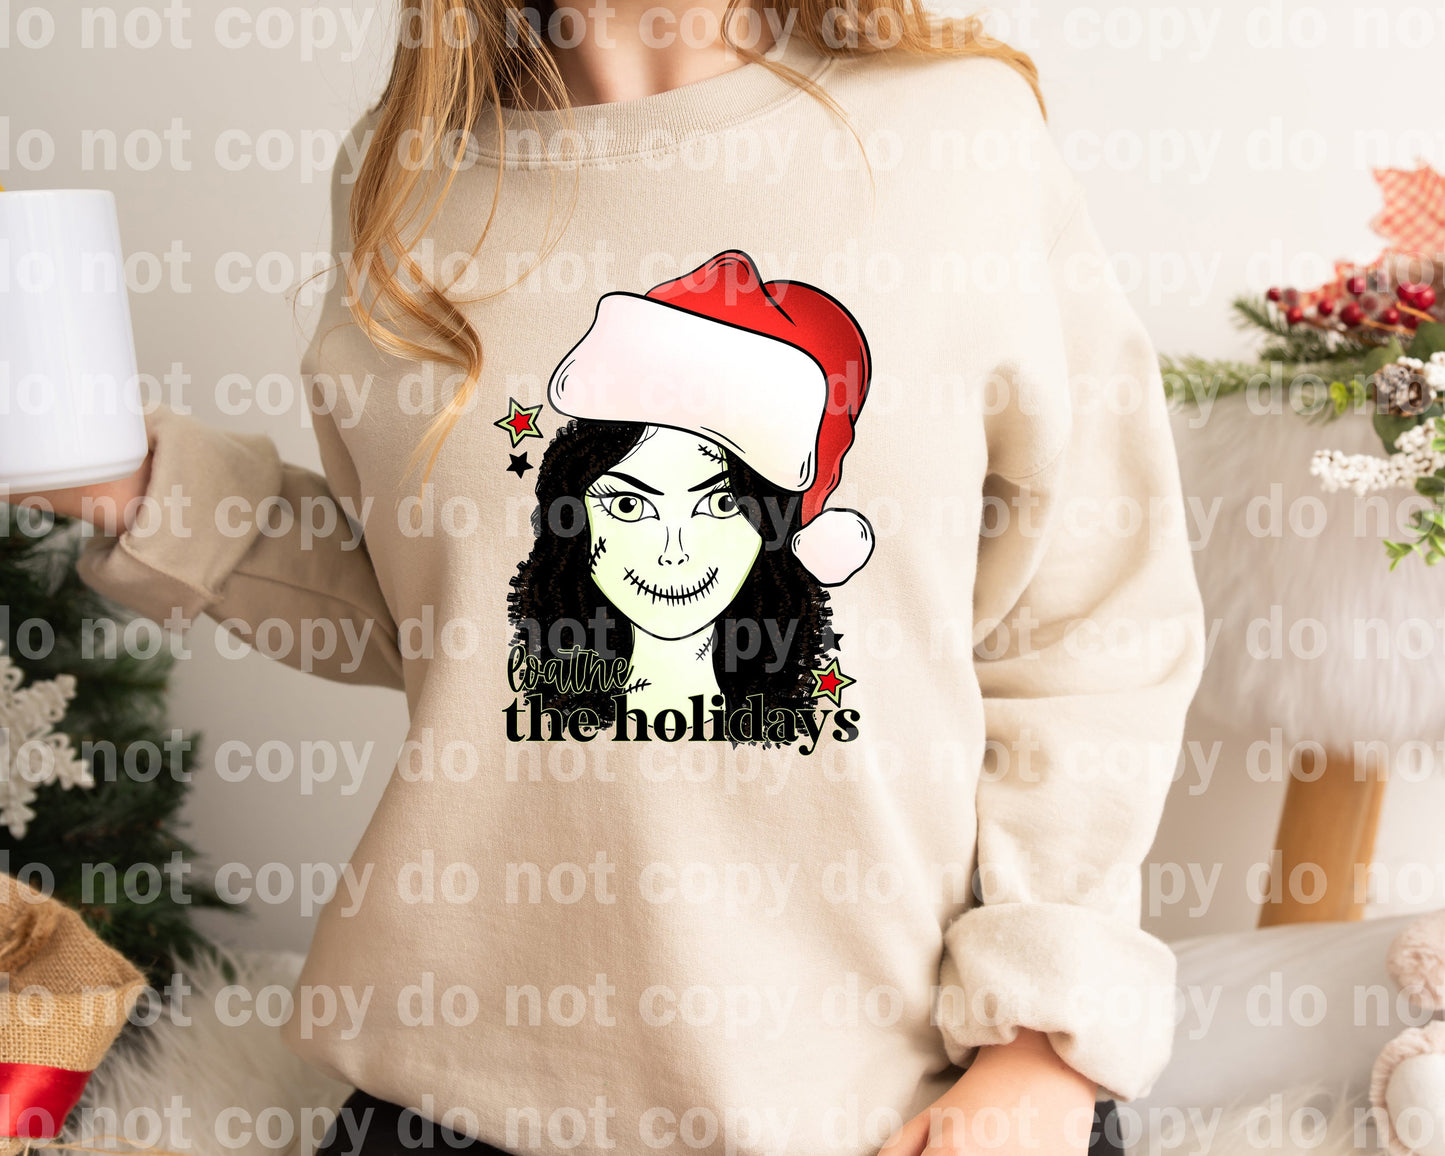 Loathe The Holidays Curly Hair with Optional Two Rows Sleeve Designs Dream Print or Sublimation Print